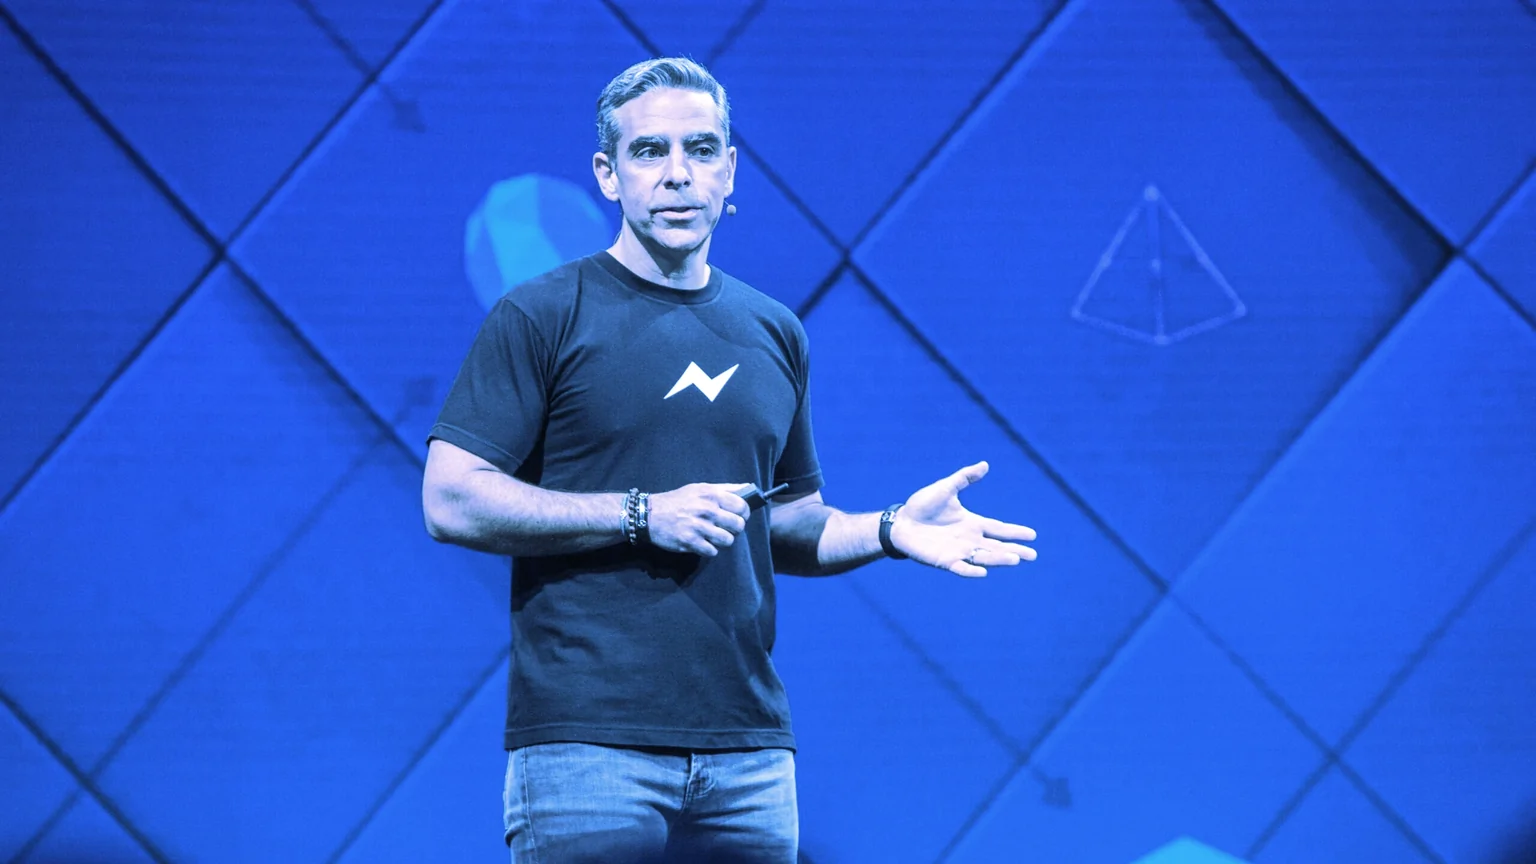 David Marcus, head of Novi crypto wallet at Facebook, speaks in 2017 when he was in charge of Facebook Messenger. Photo: Anthony Quintano on Flickr (CC BY 2.0)